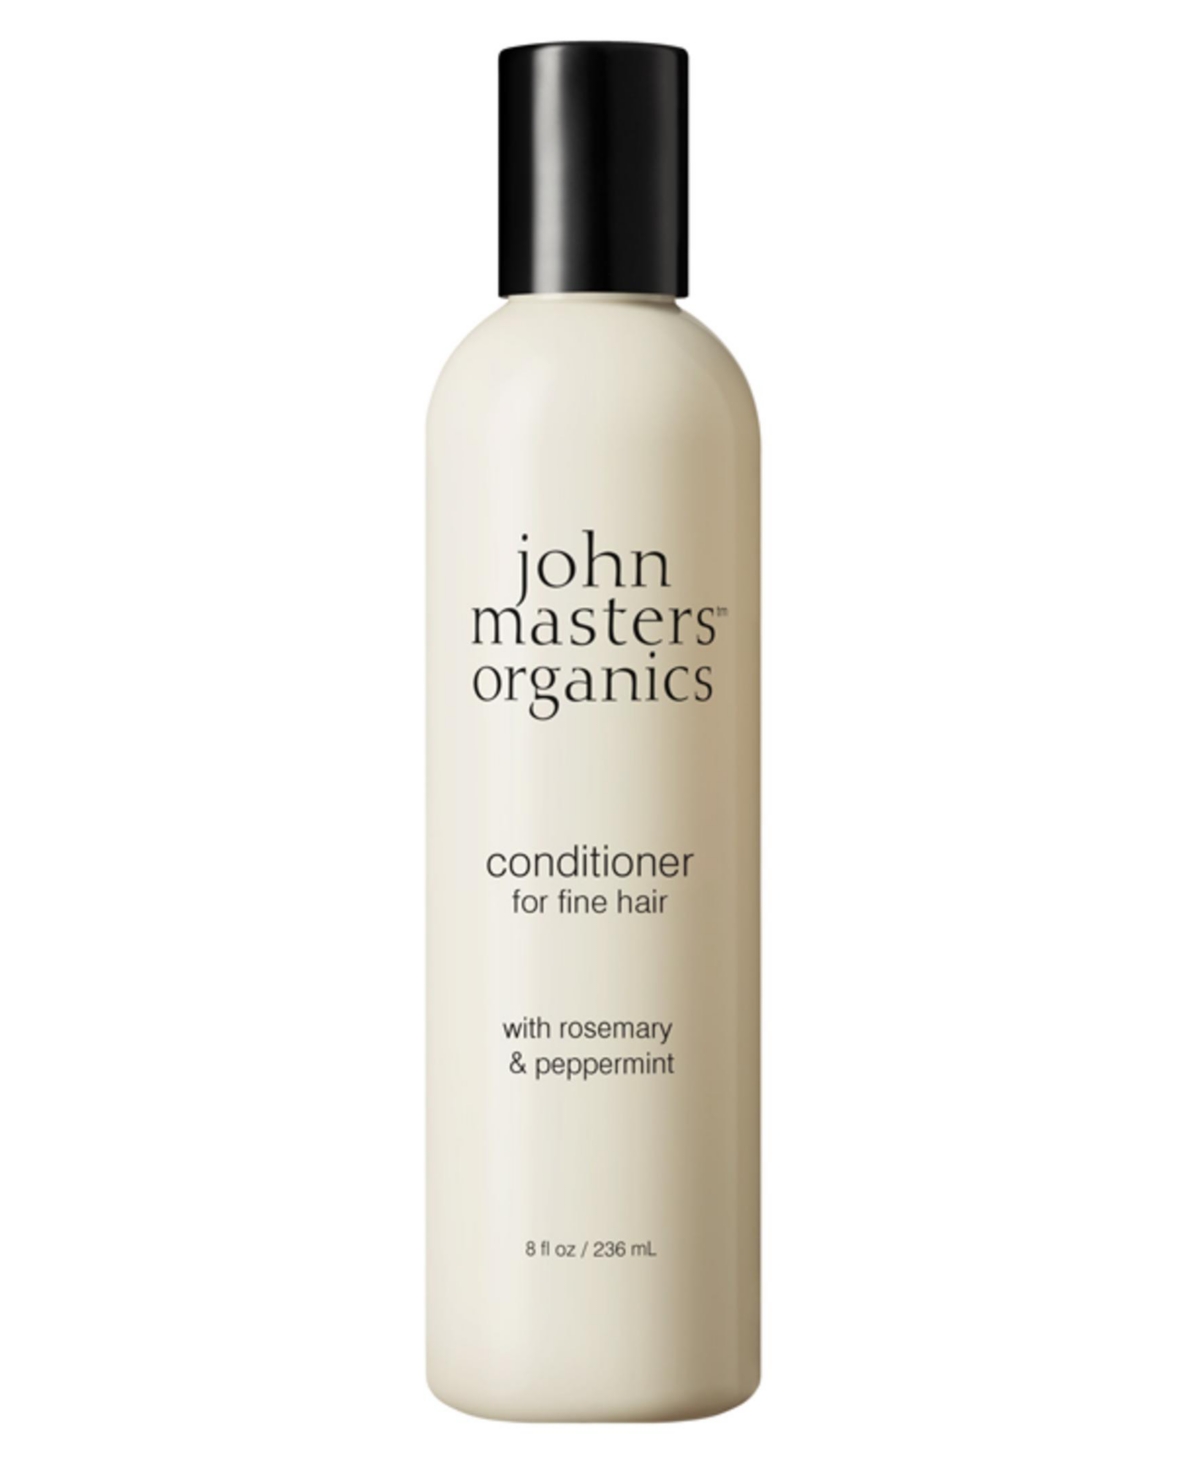 John Masters Organics Conditioner For Fine Hair With Rosemary & Peppermint, 8 Oz.